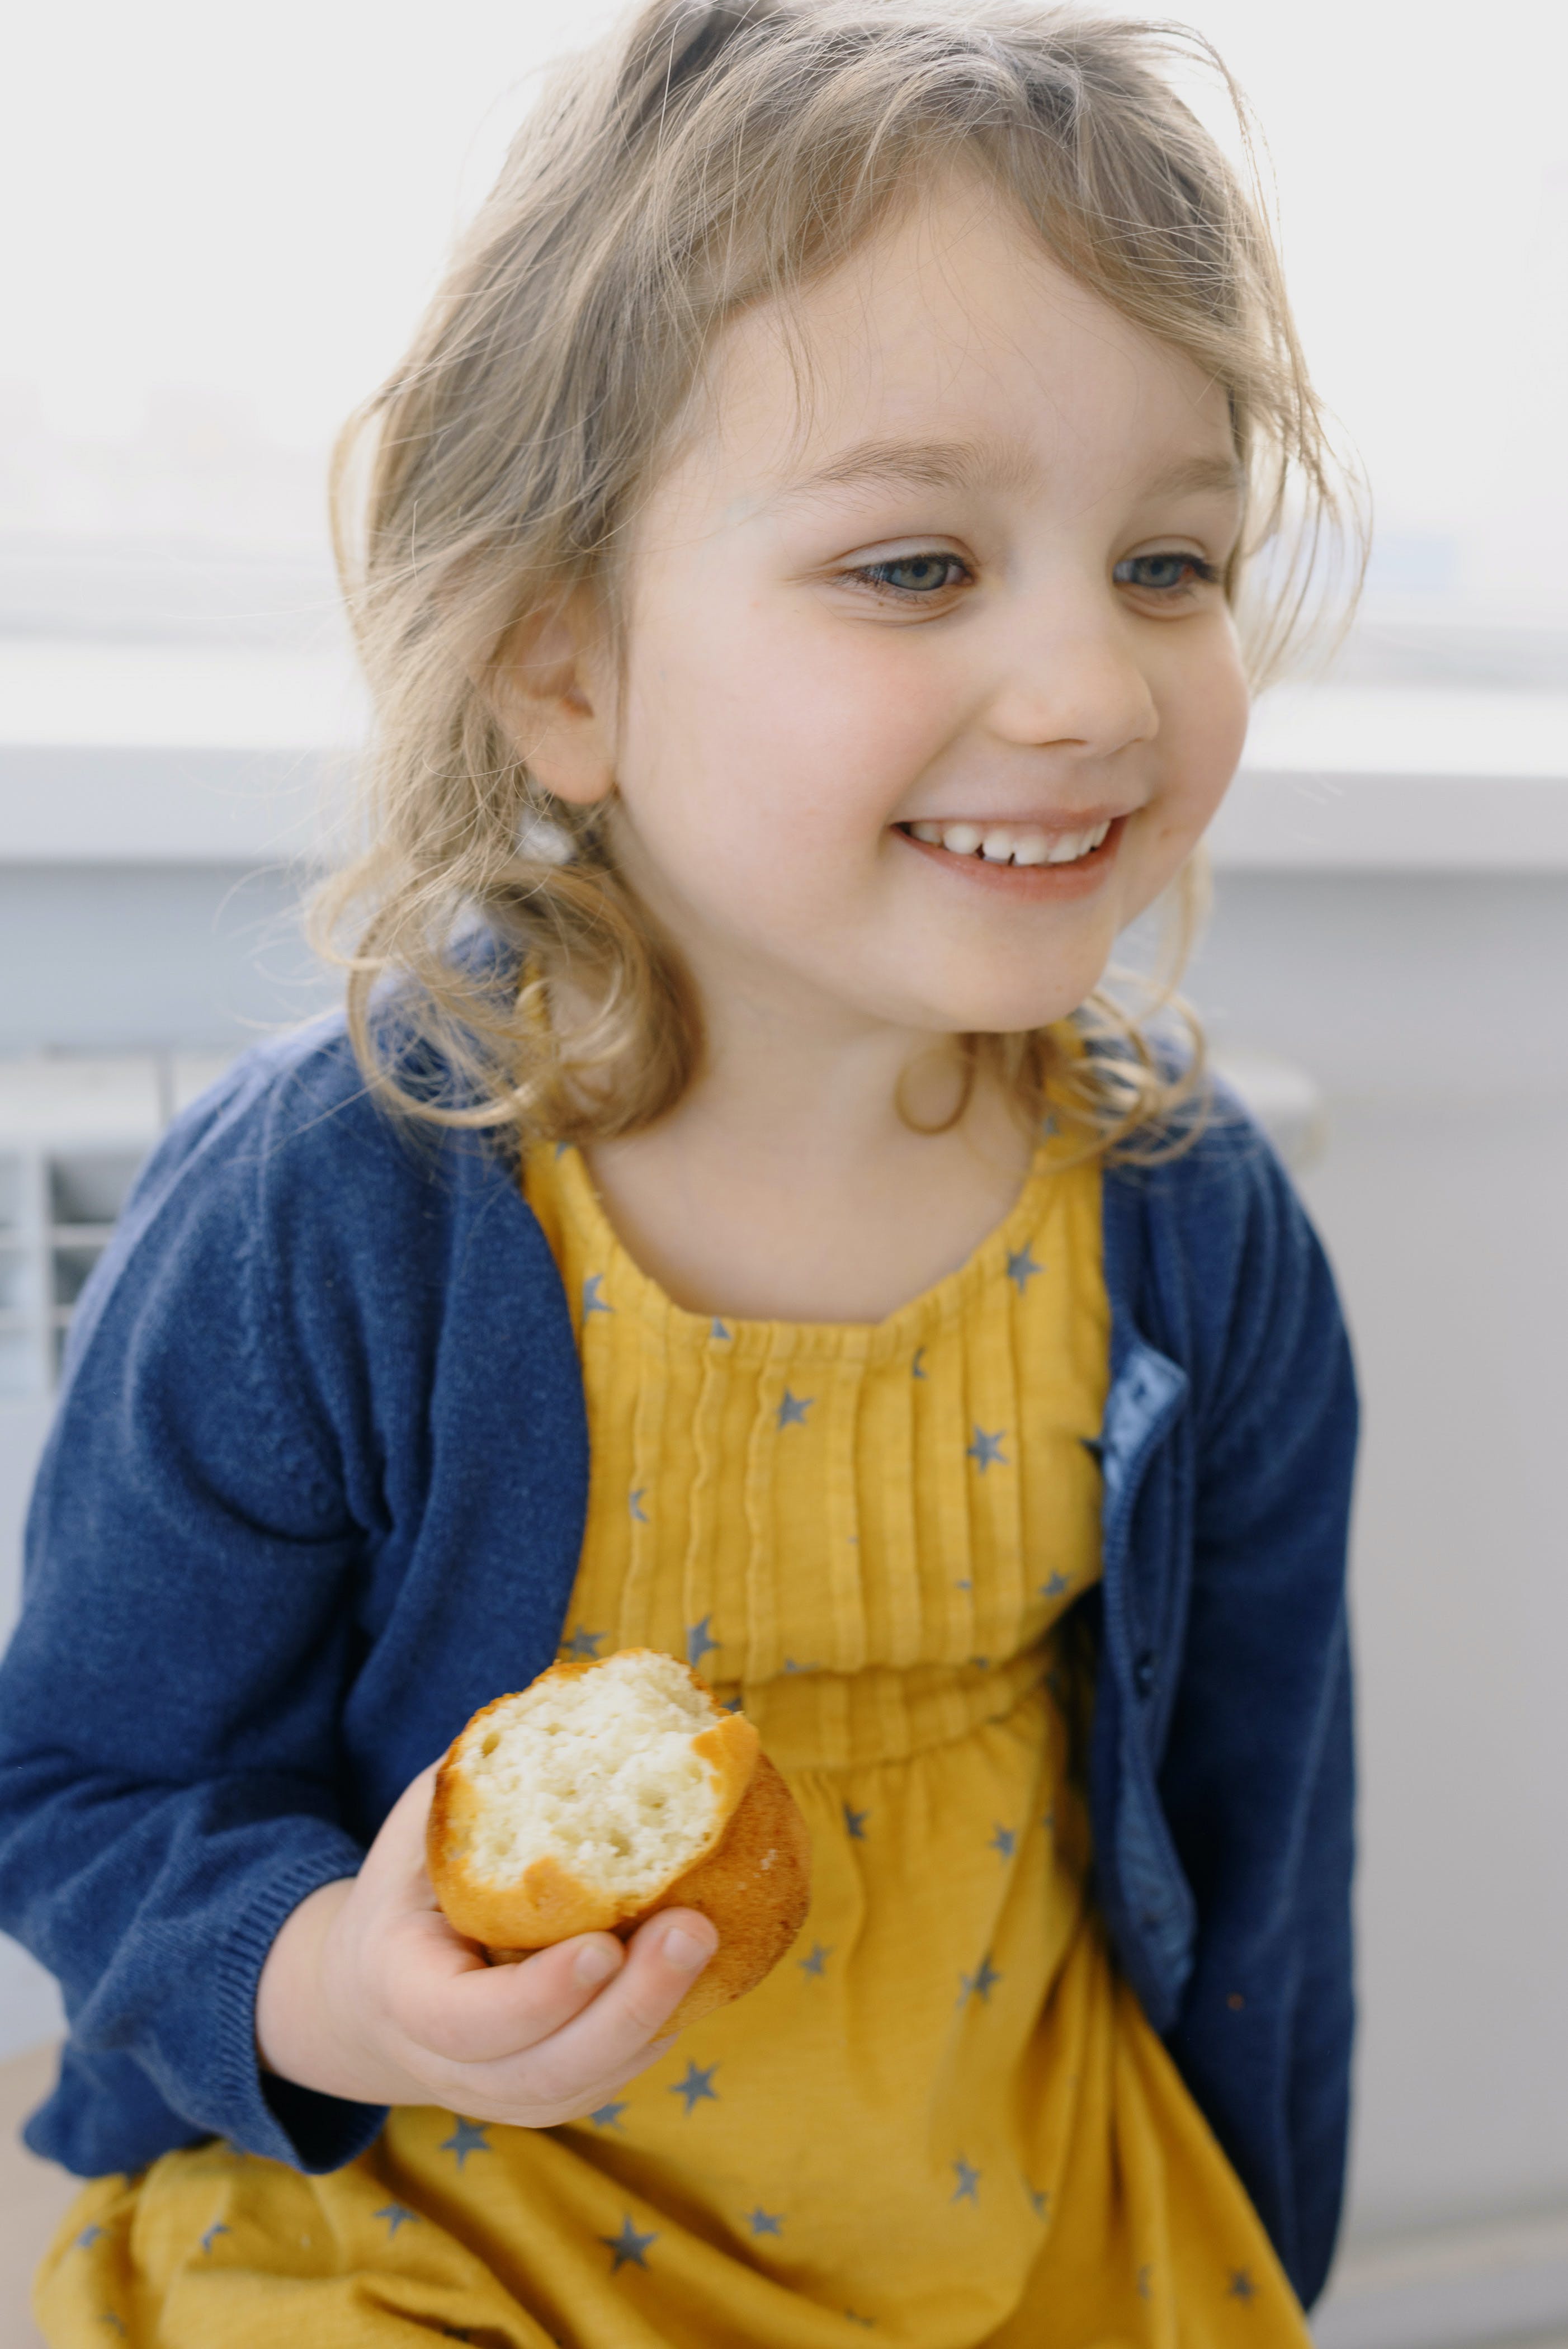 Photo Of Child Holding Bread